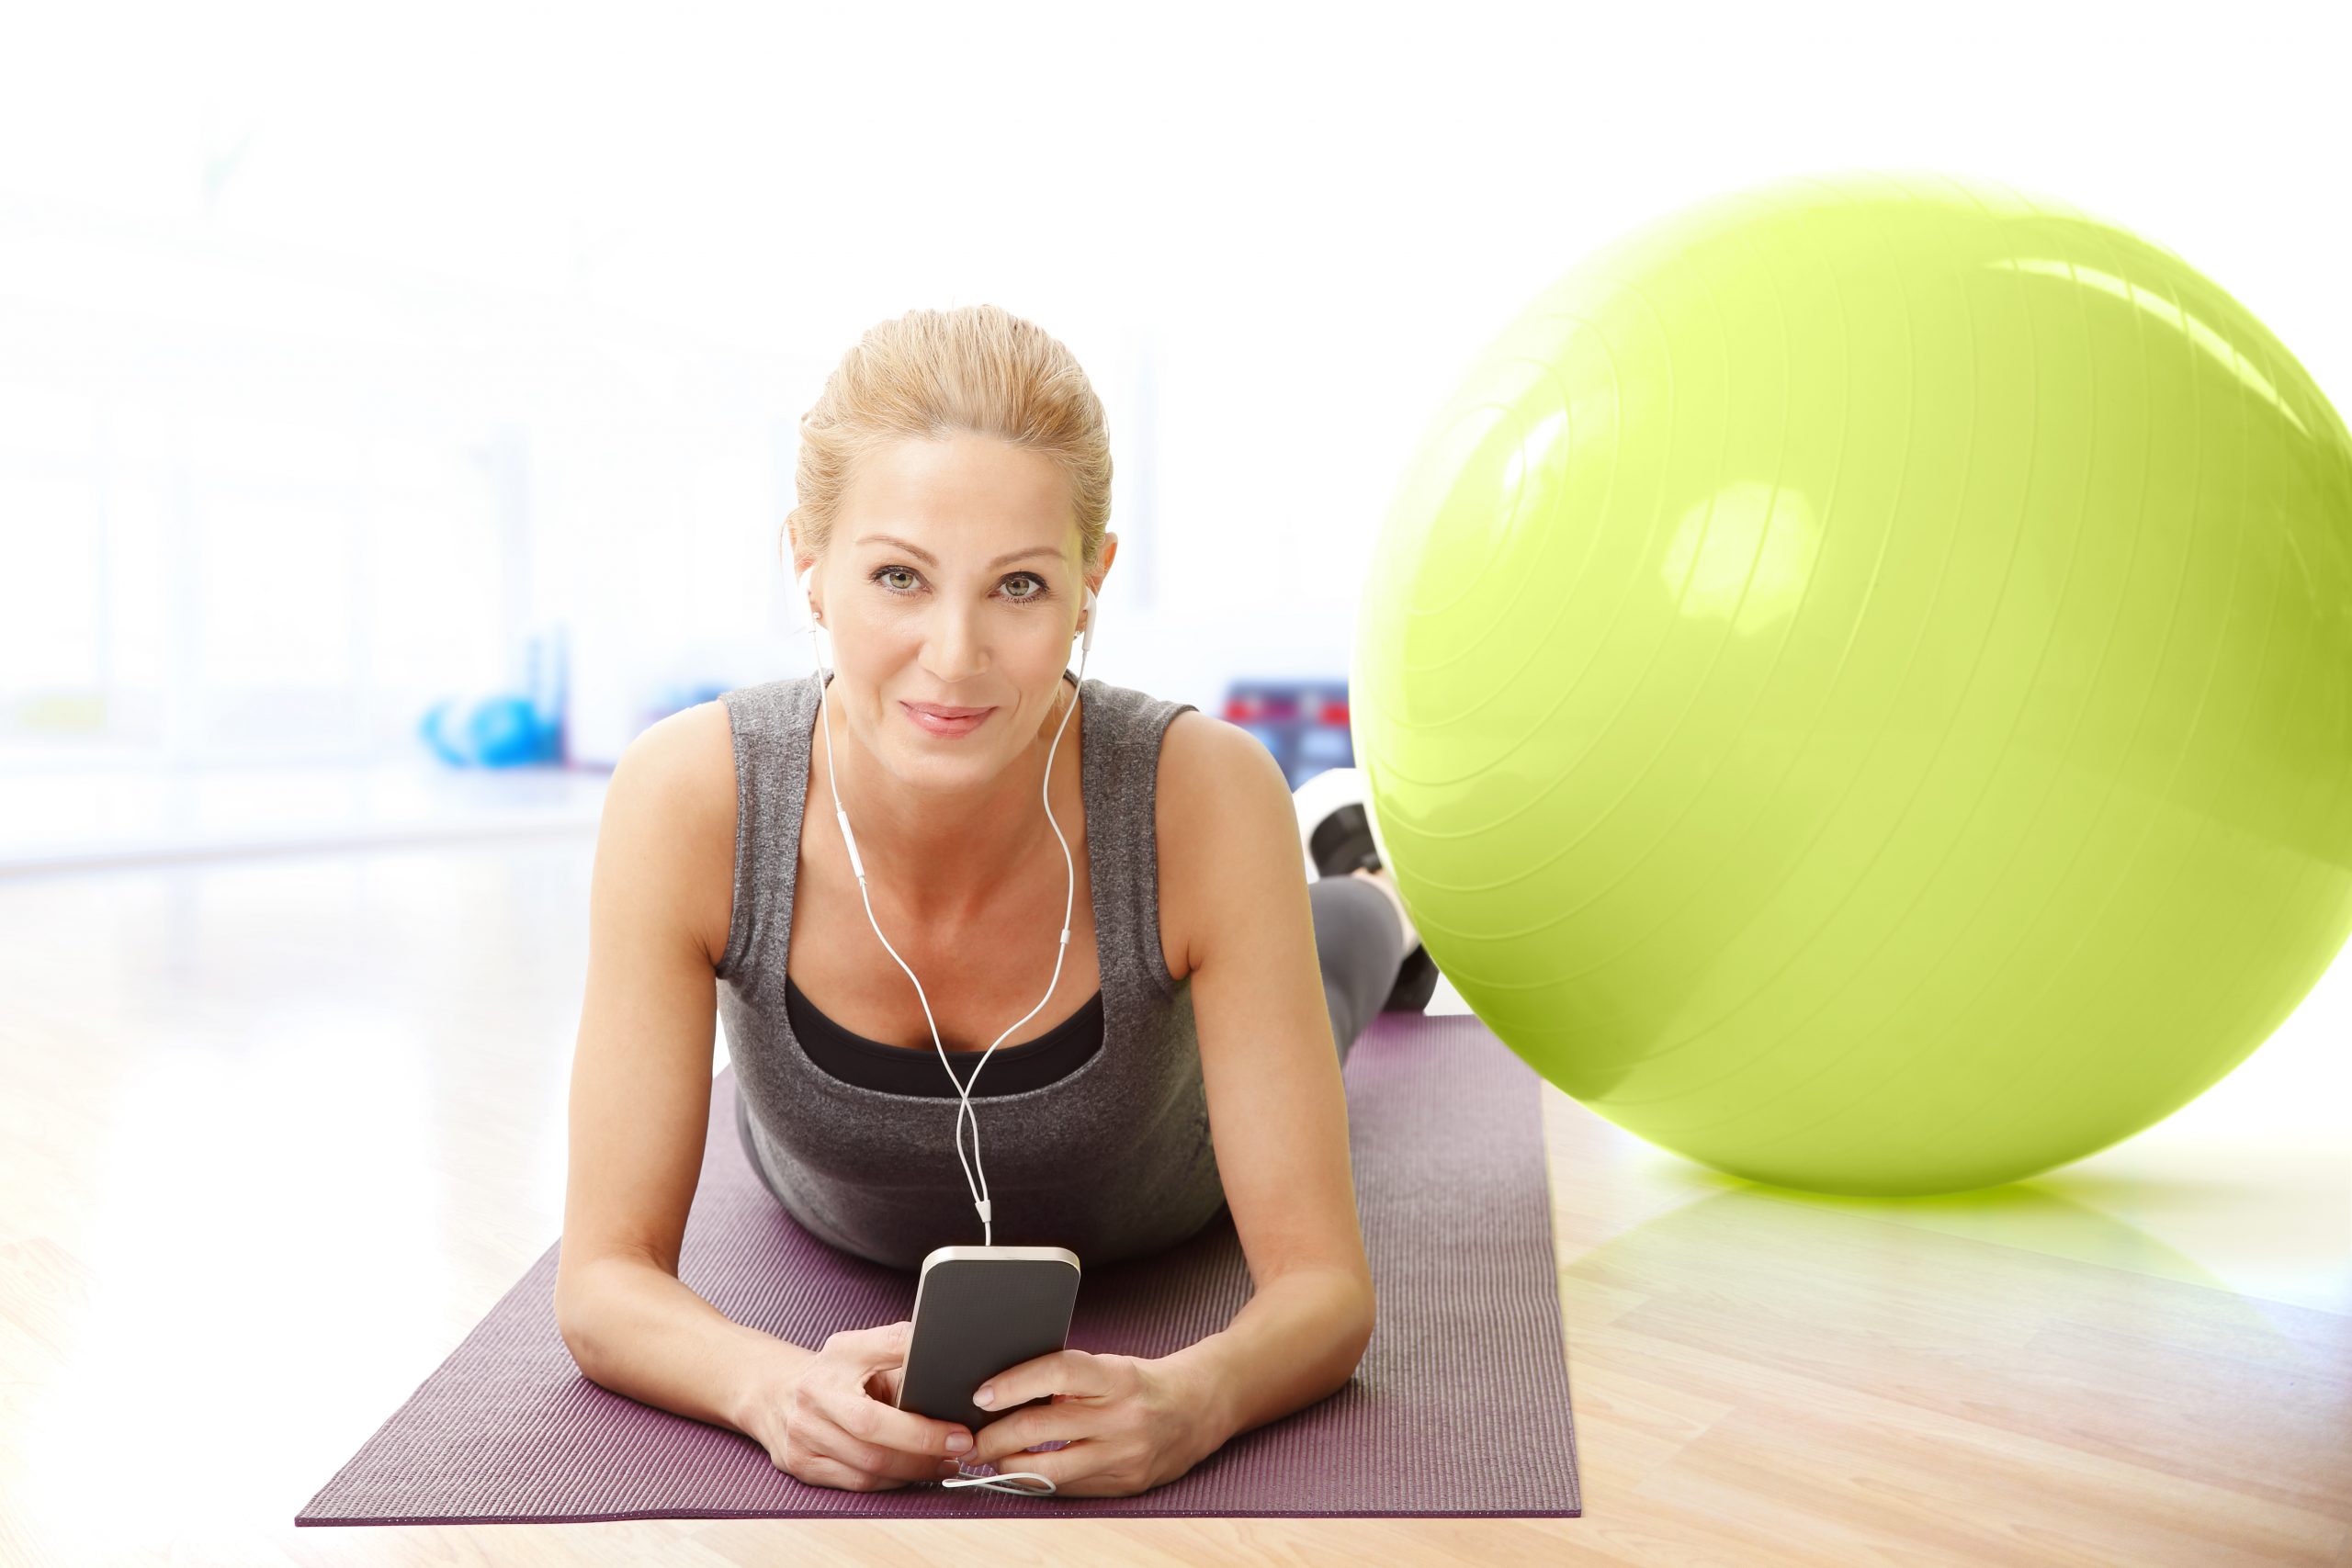 Portrait of smiling middle age woman lying on exercise mat and listening music with mobile phone while relaxing after fitness workout.